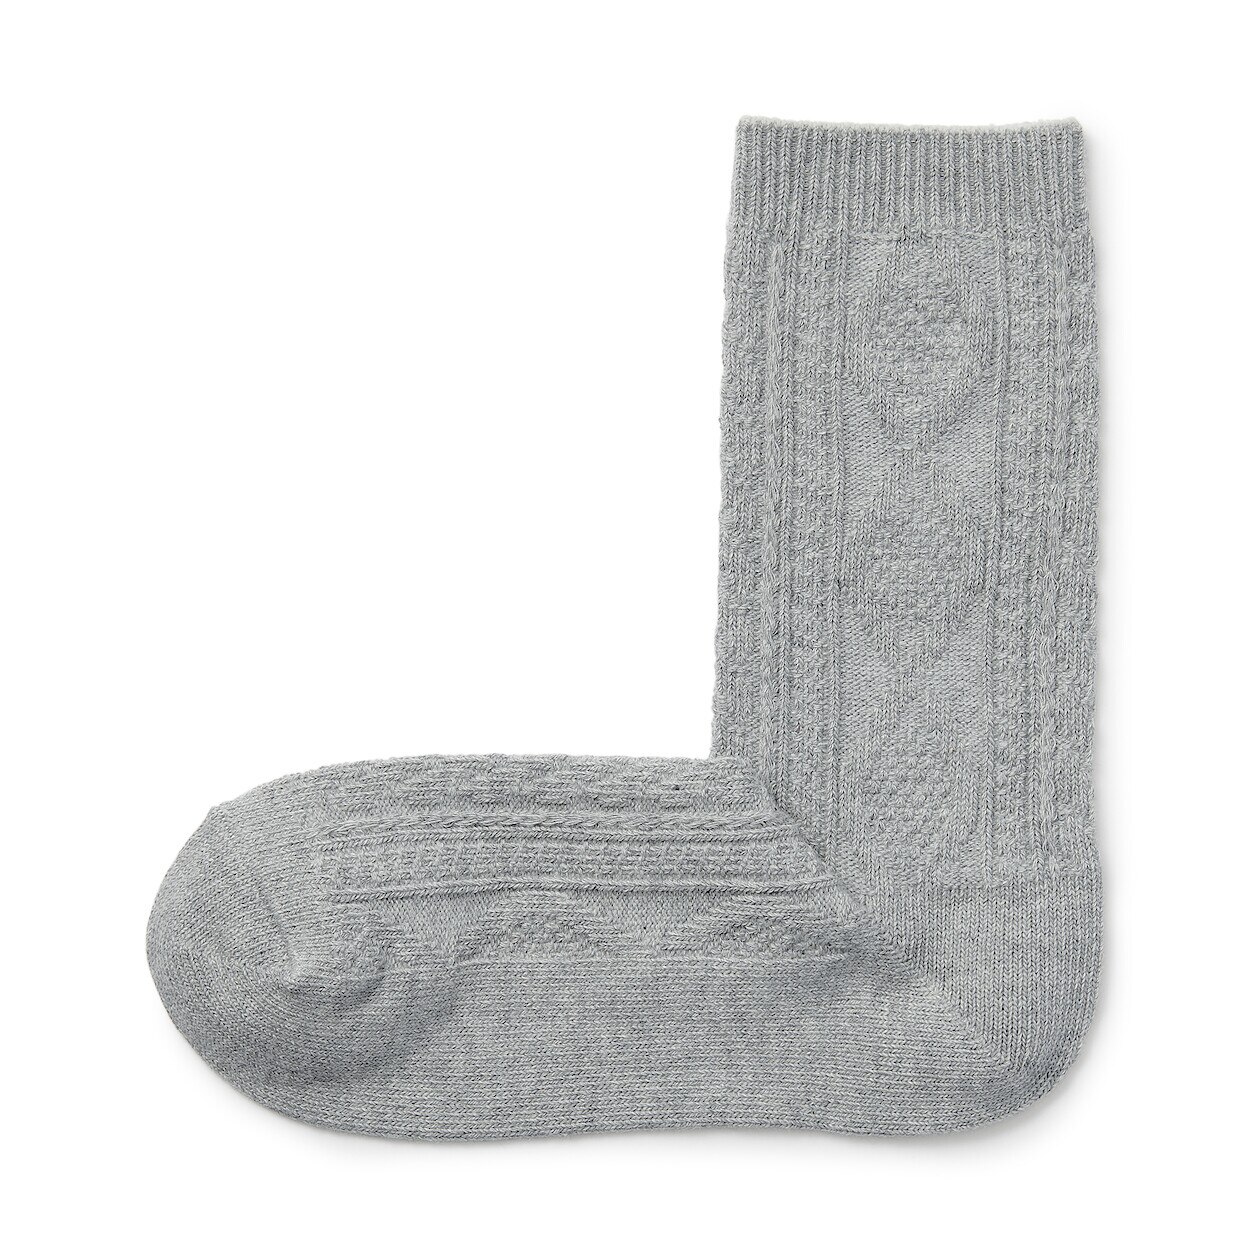 Right Angle Cable Knit Socks